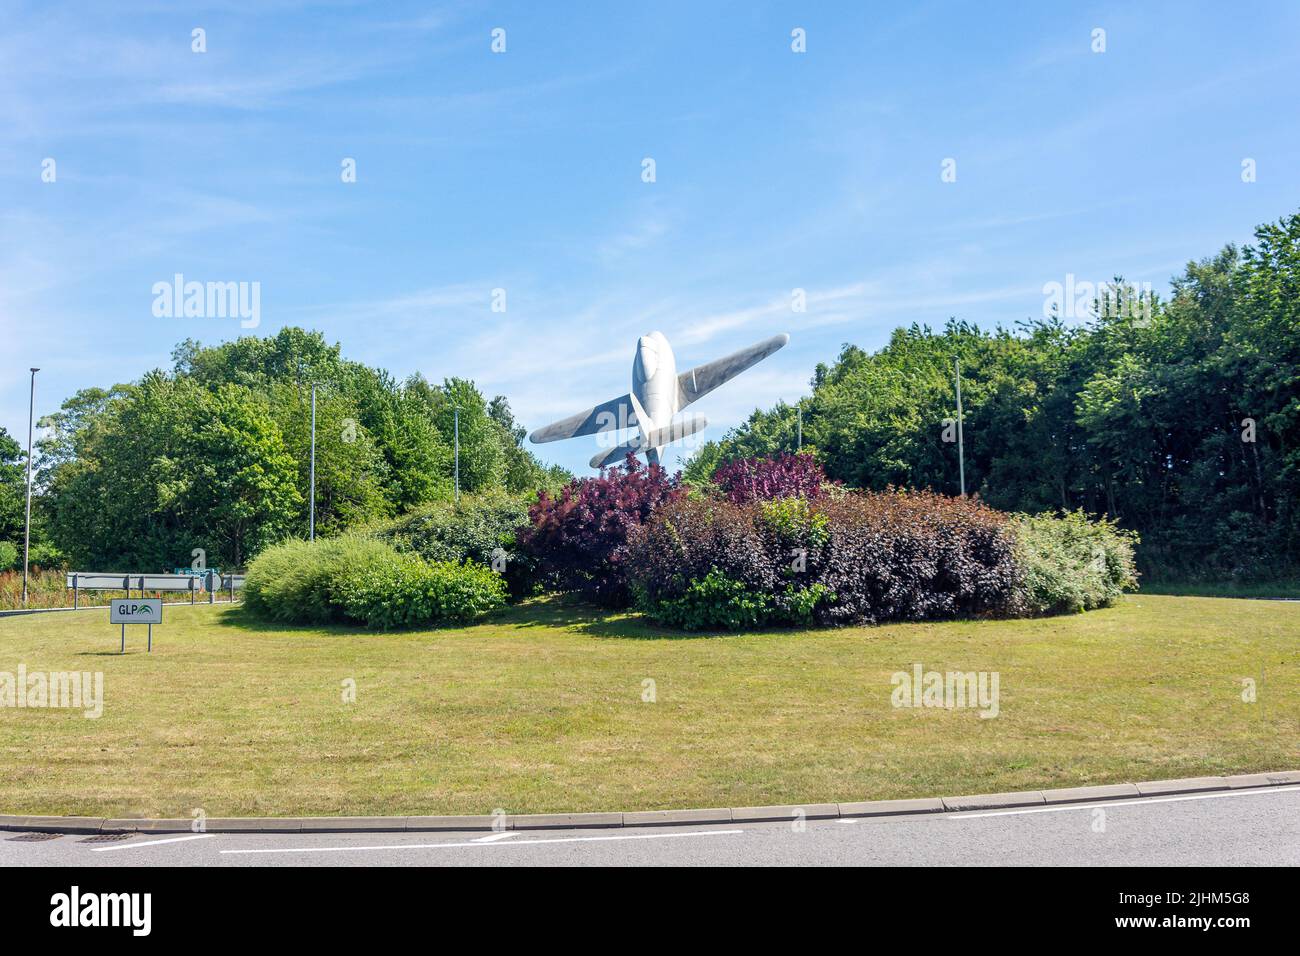 Gloster aircraft on The Whittle Roundabout, Lutterworth, Leicestershire, England, United Kingdom Stock Photo